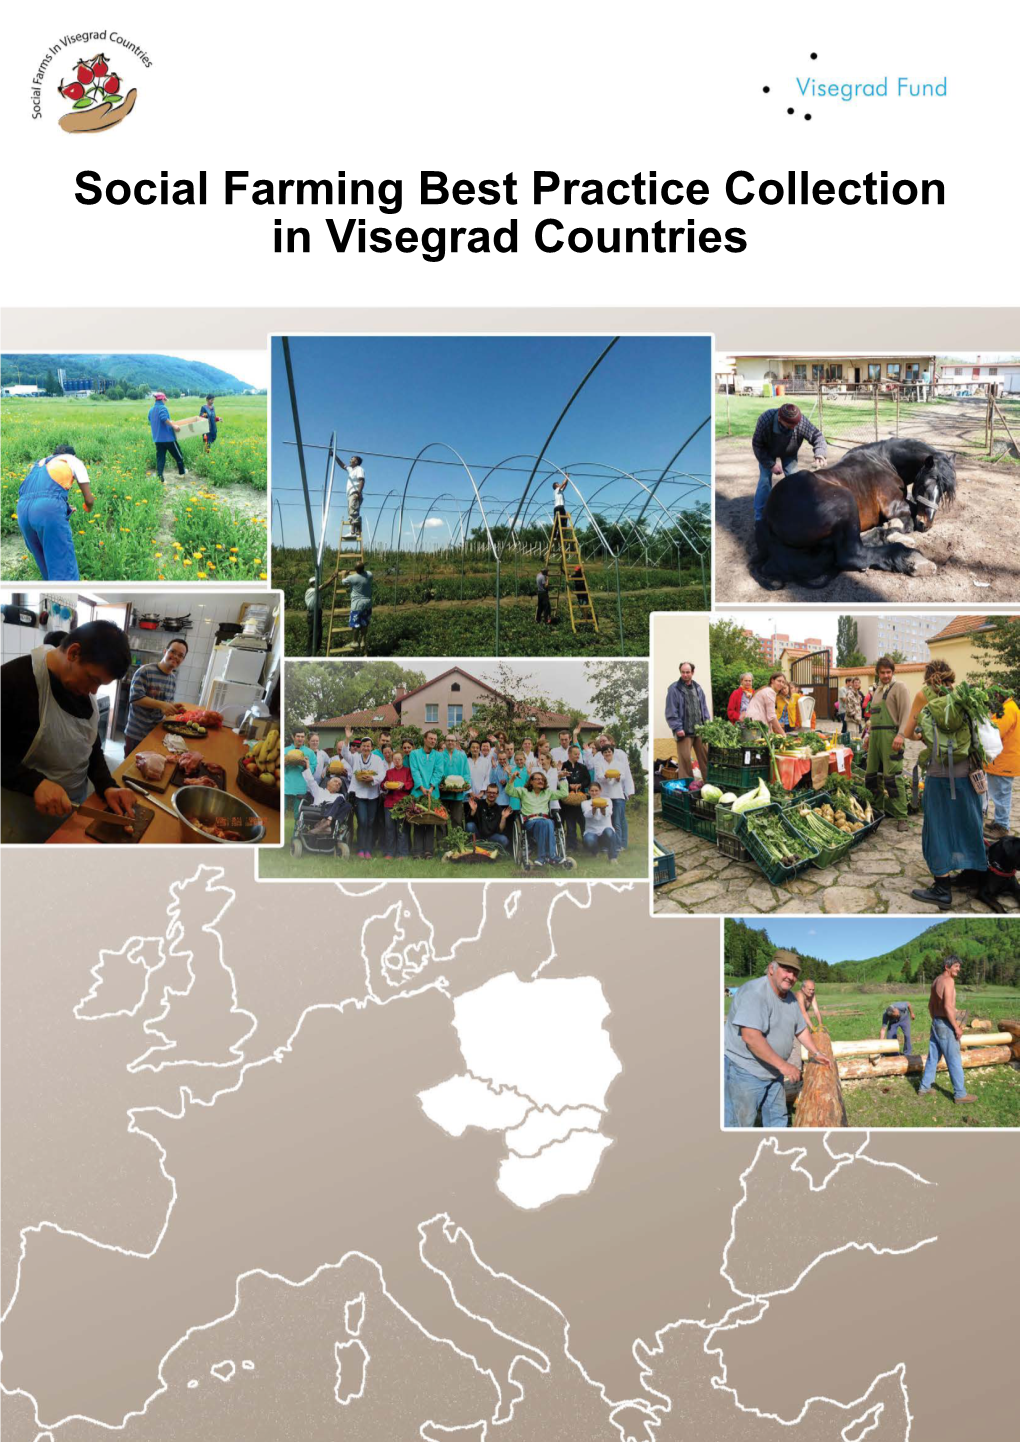 Social Farming Best Practice Collection in Visegrad Countries